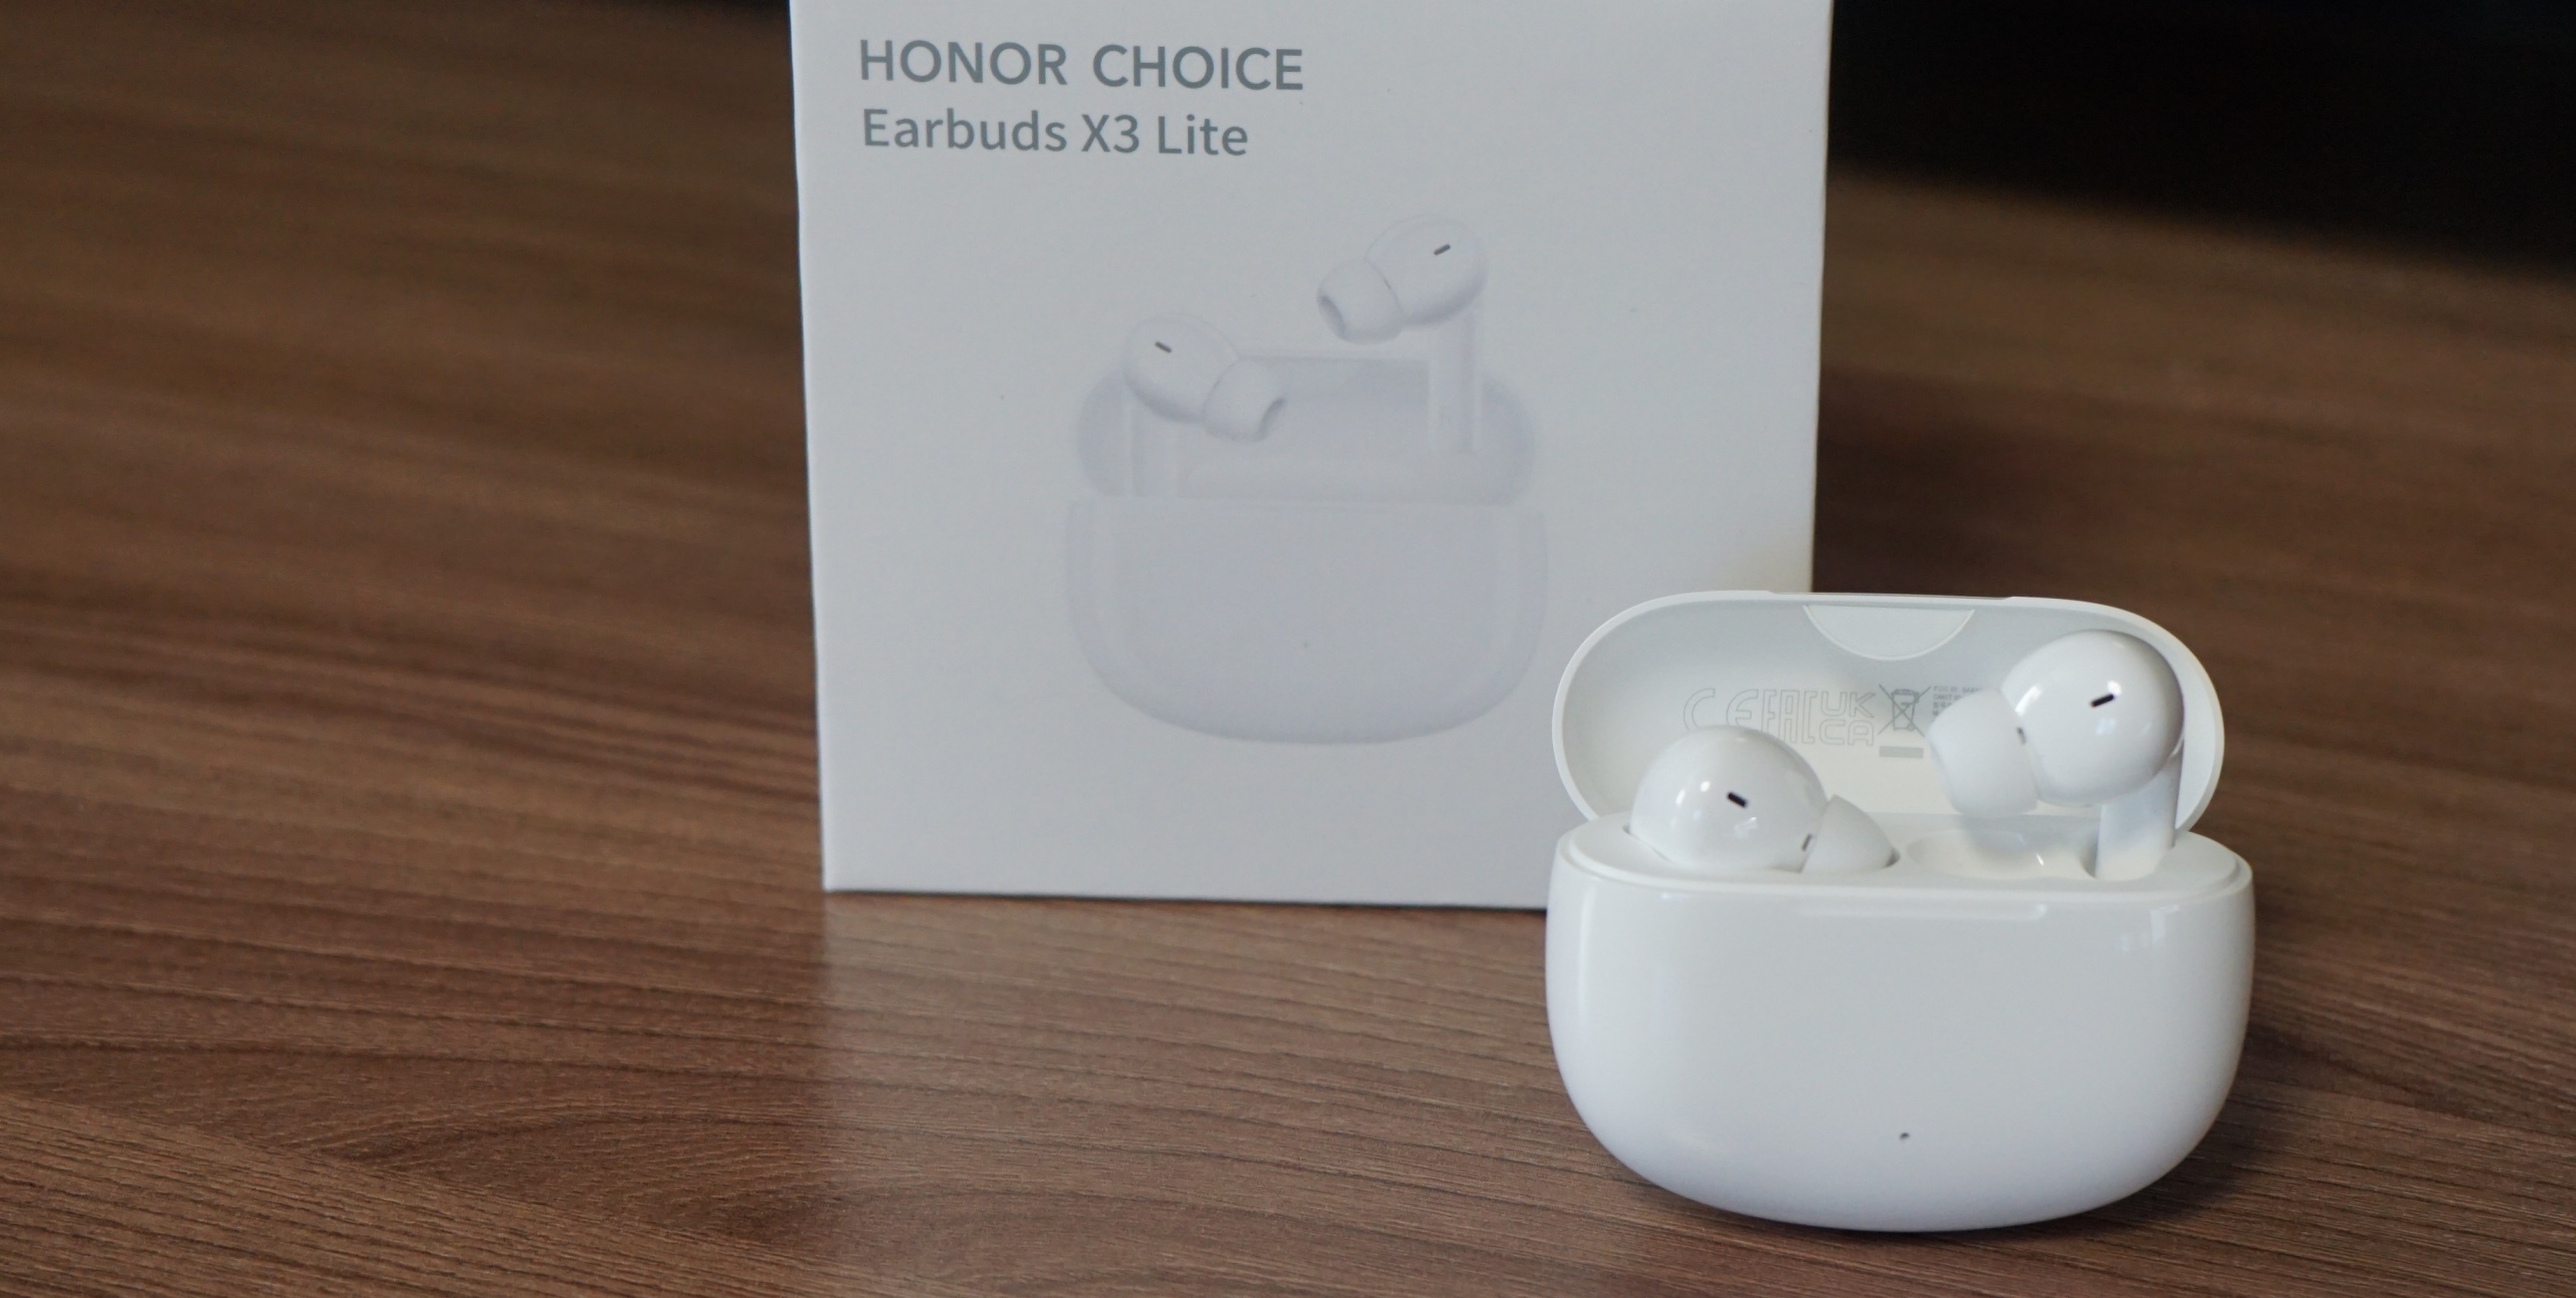 Honor choice earbuds x5 pro обзоры. Наушники Earbuds x3 Lite. TWS Honor choice Earbuds x3. Honor choice Earbuds x3 Lite. Наушники Honor Earbuds x3.